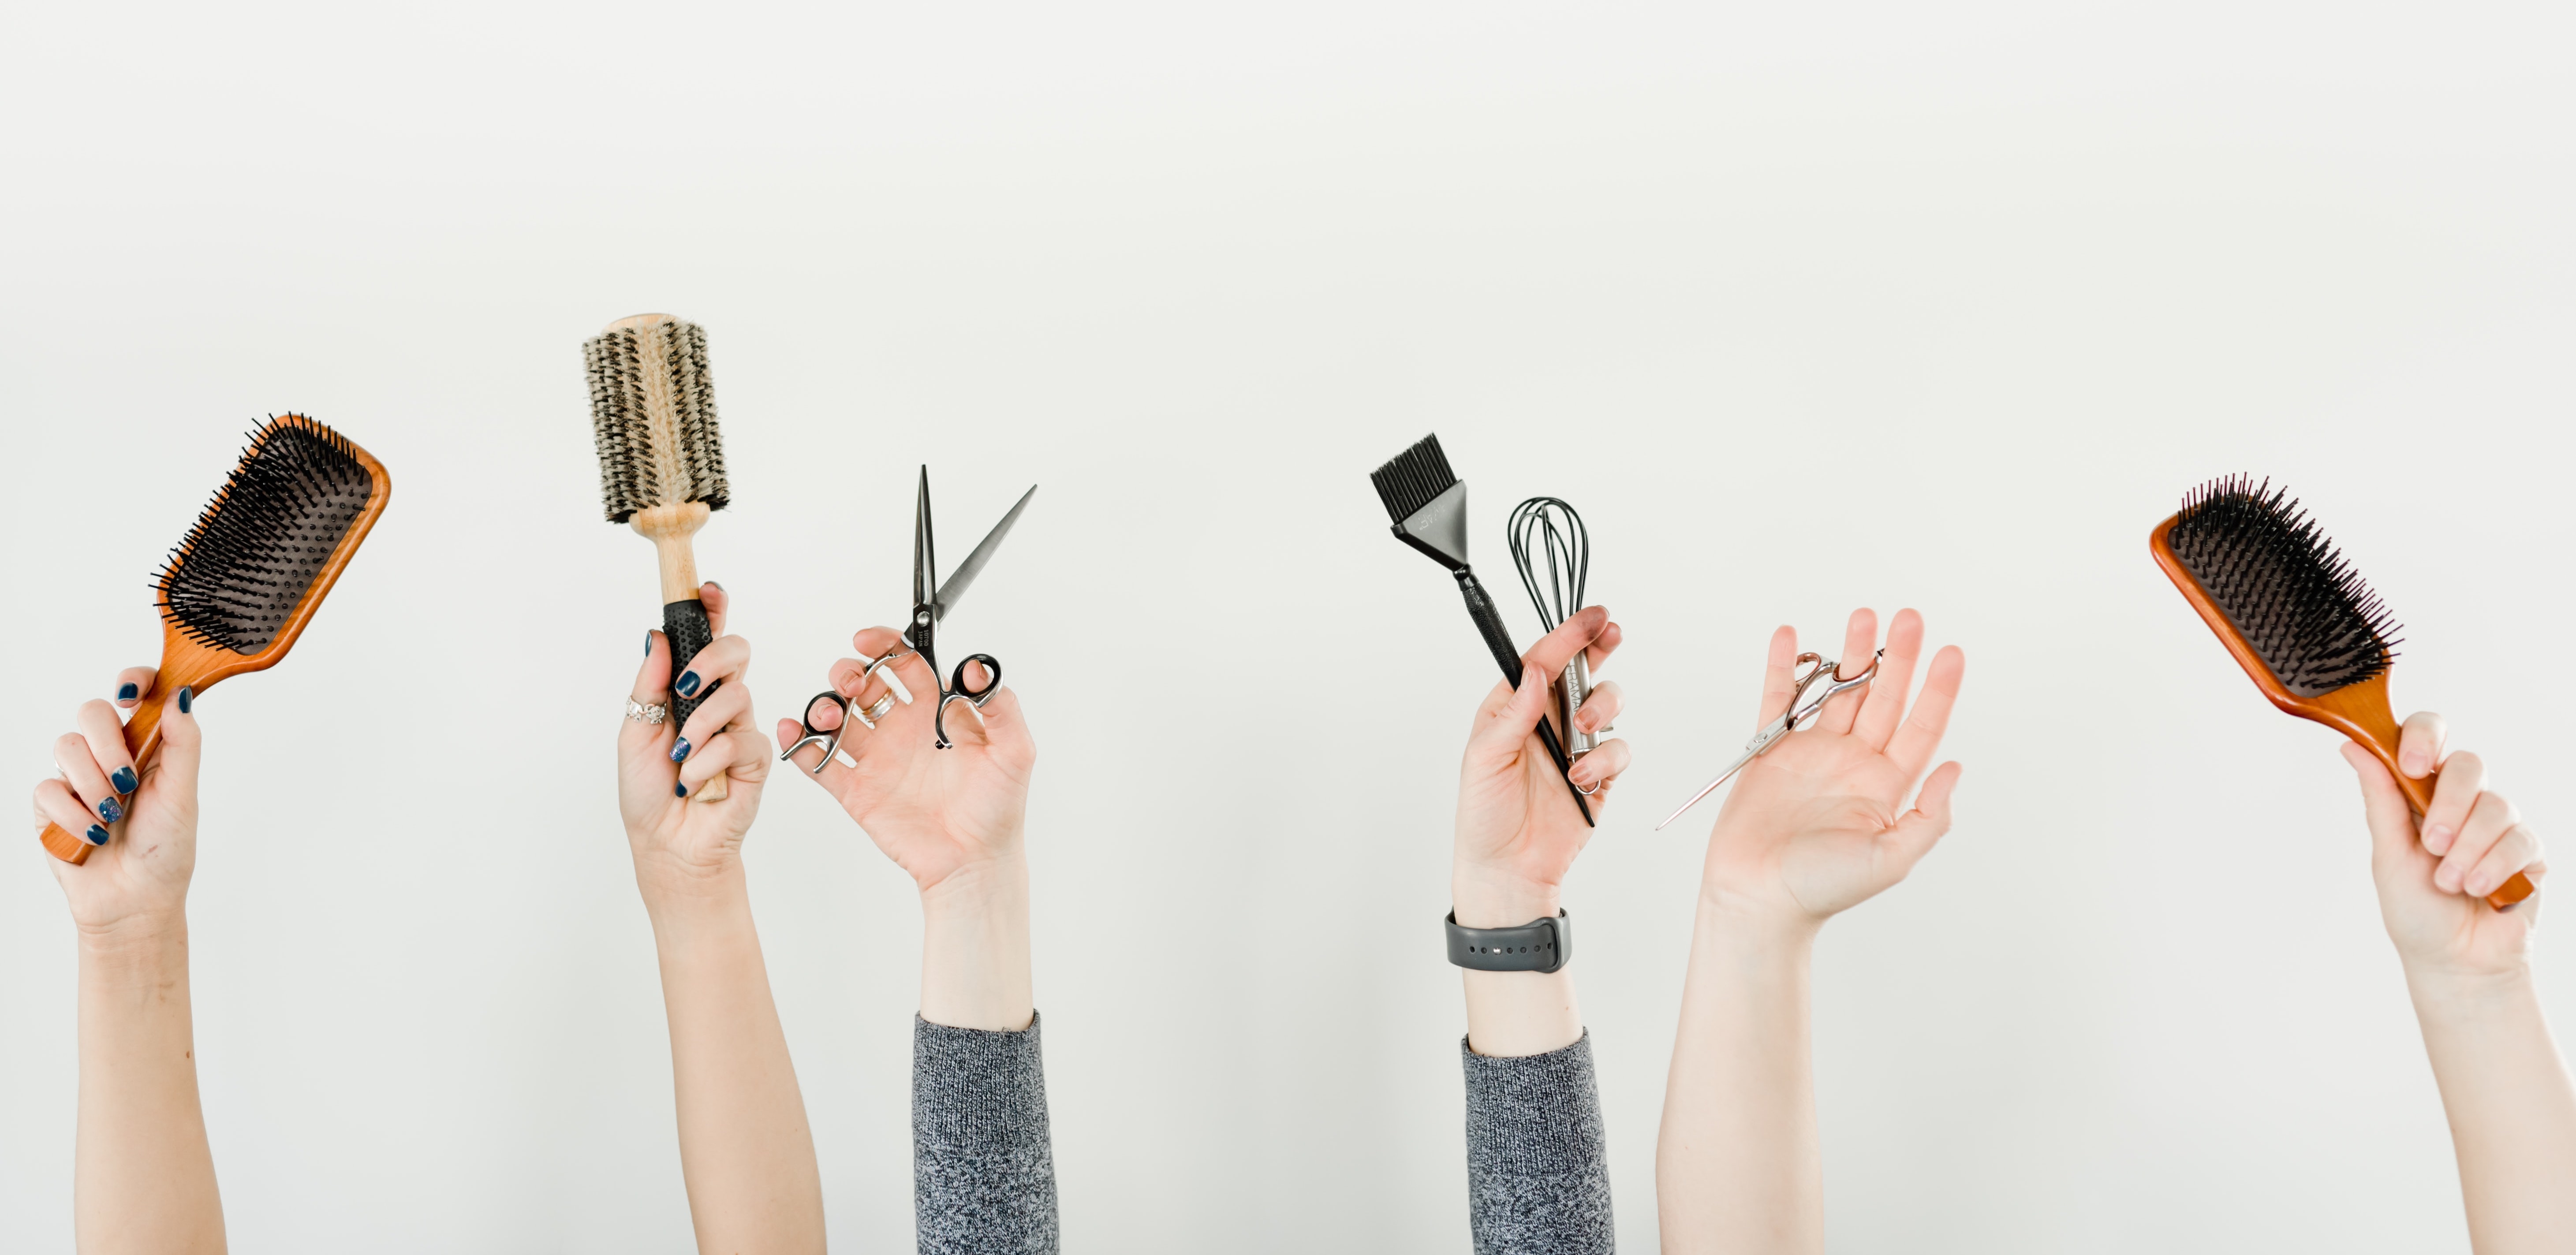 hands in the air holding hair scissors, brushes and combs to represent kelowna hair salons